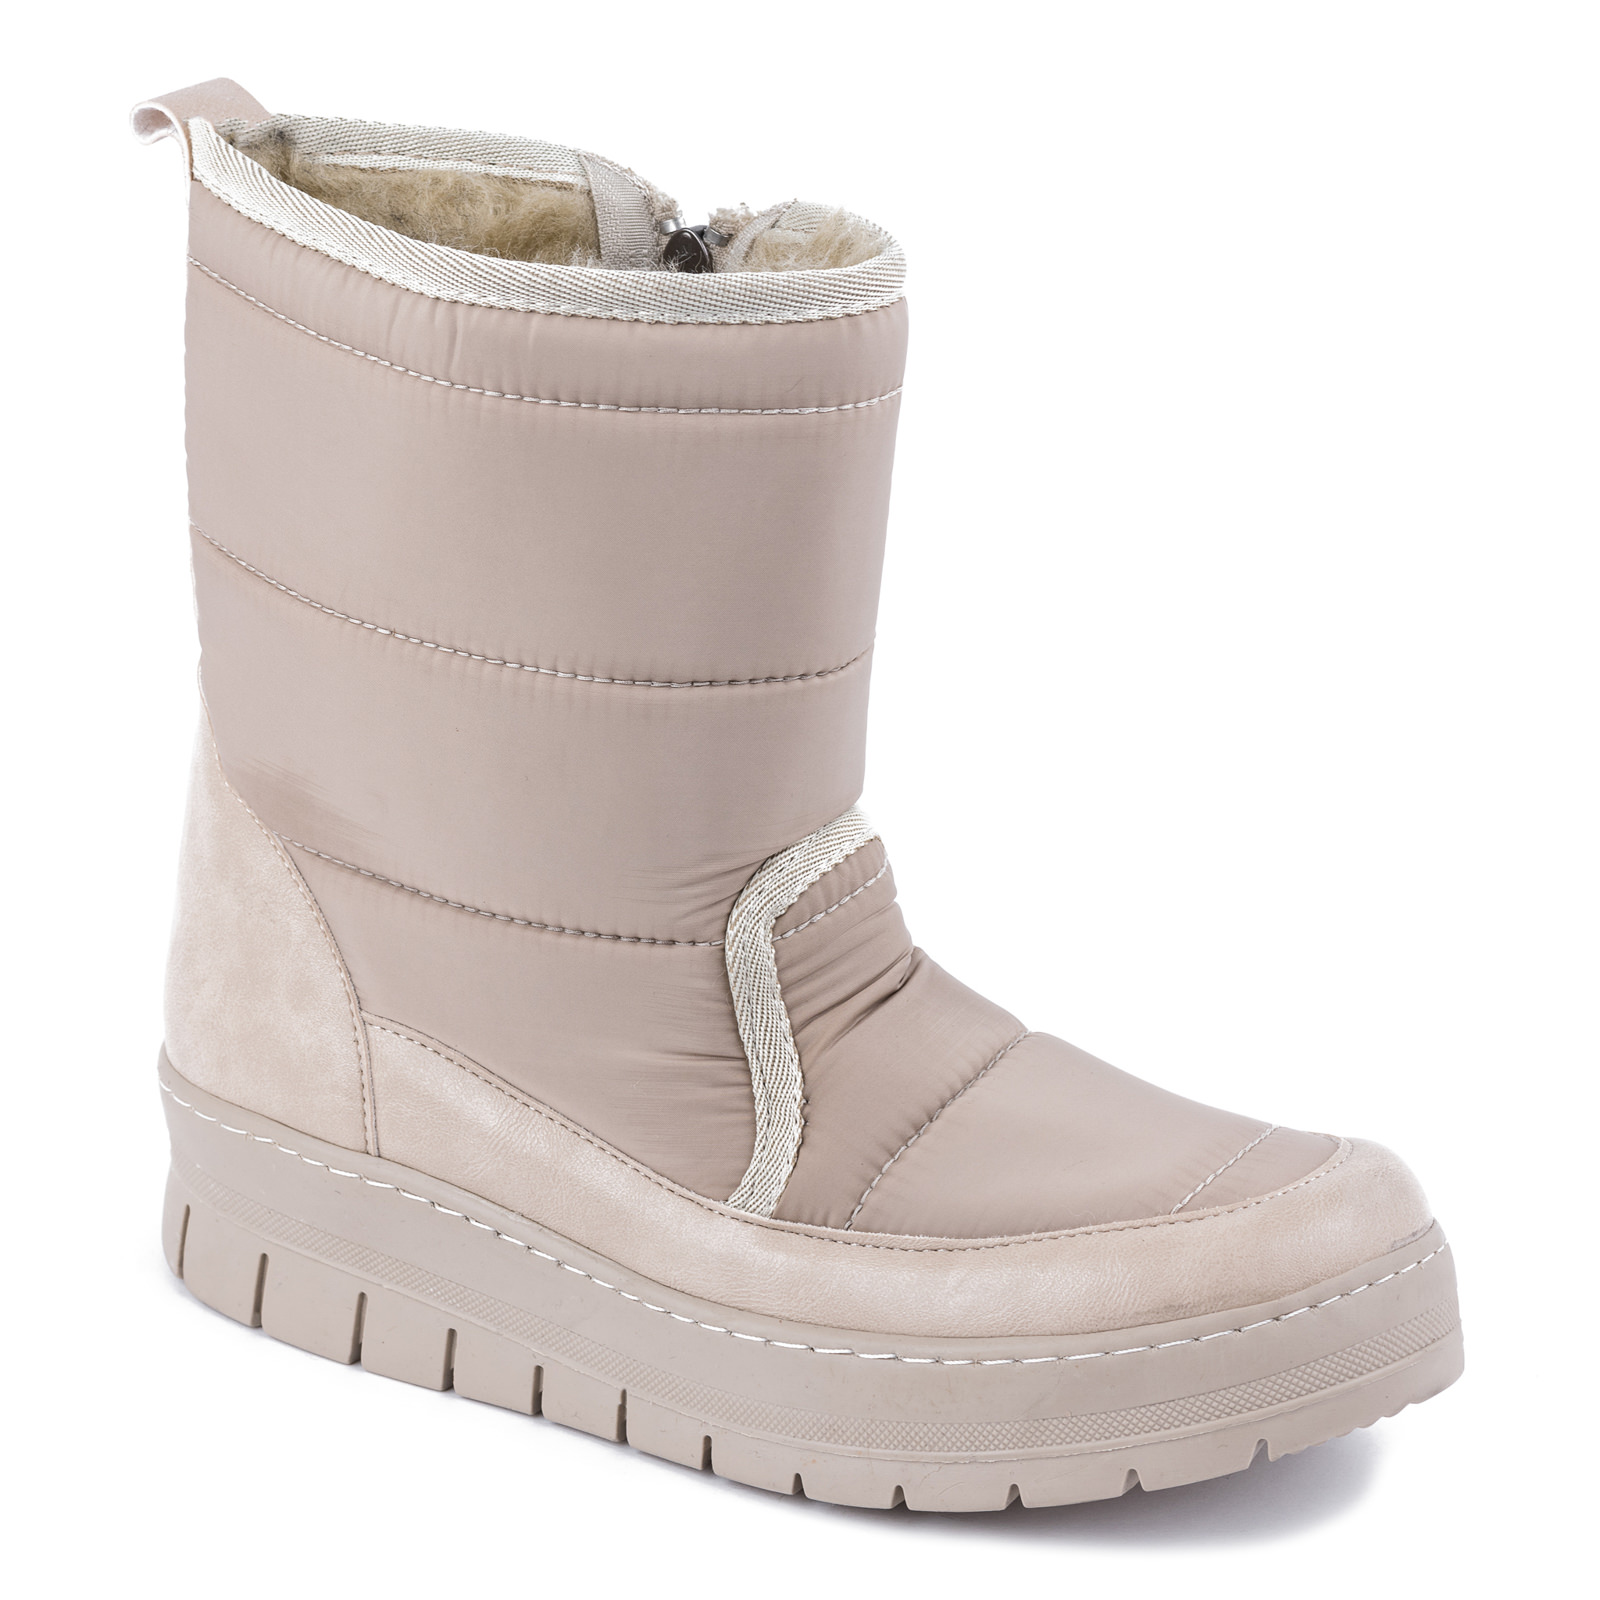 TEXAPORE ANKLE BOOTS WITH VELCRO BAND - LIGHT BEIGE